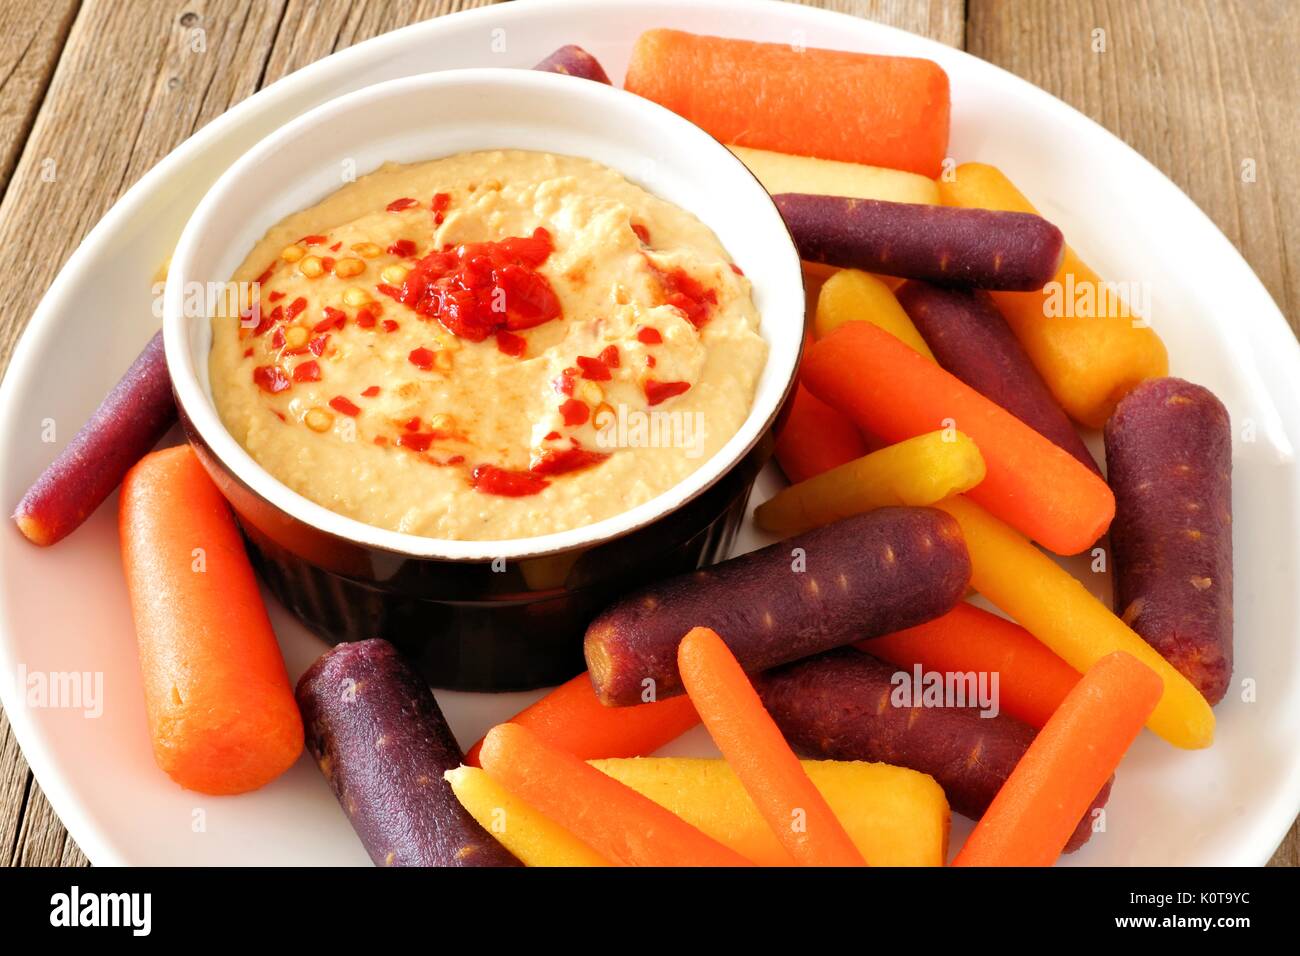 Plate of baby rainbow carrots with hummus dip, close up on a rustic wooden background Stock Photo